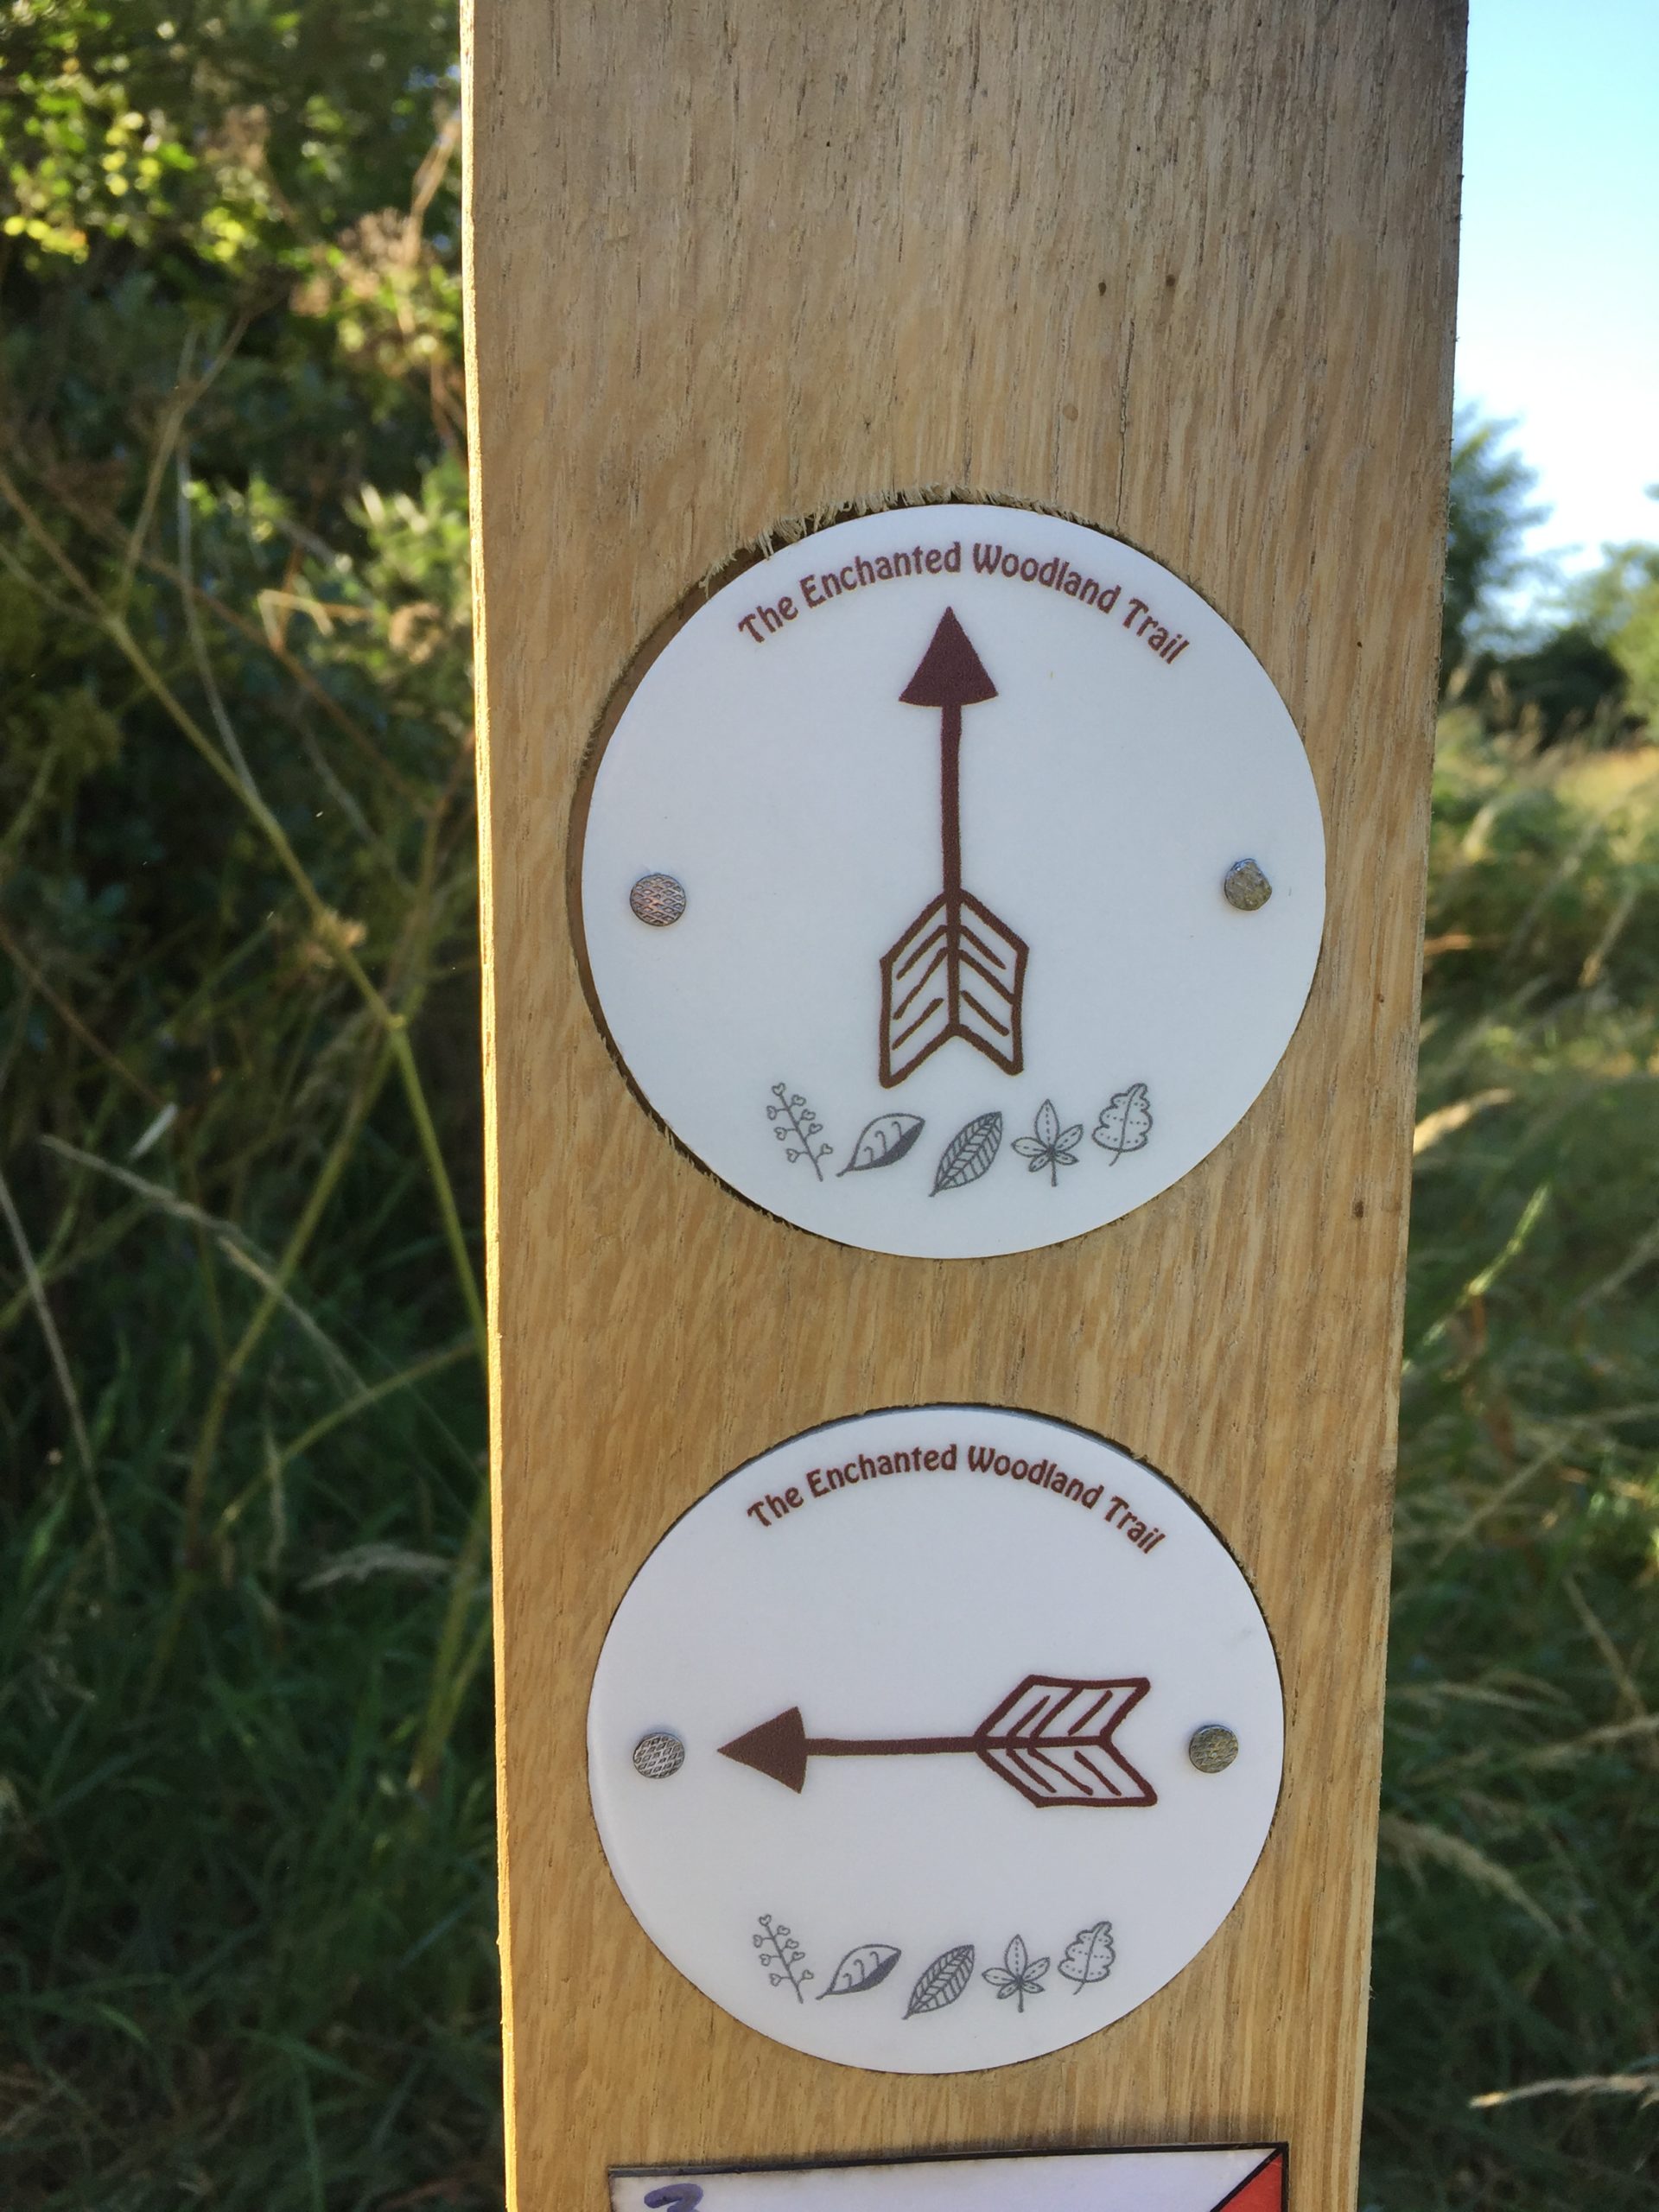 Wooden post with two waymarker arrows